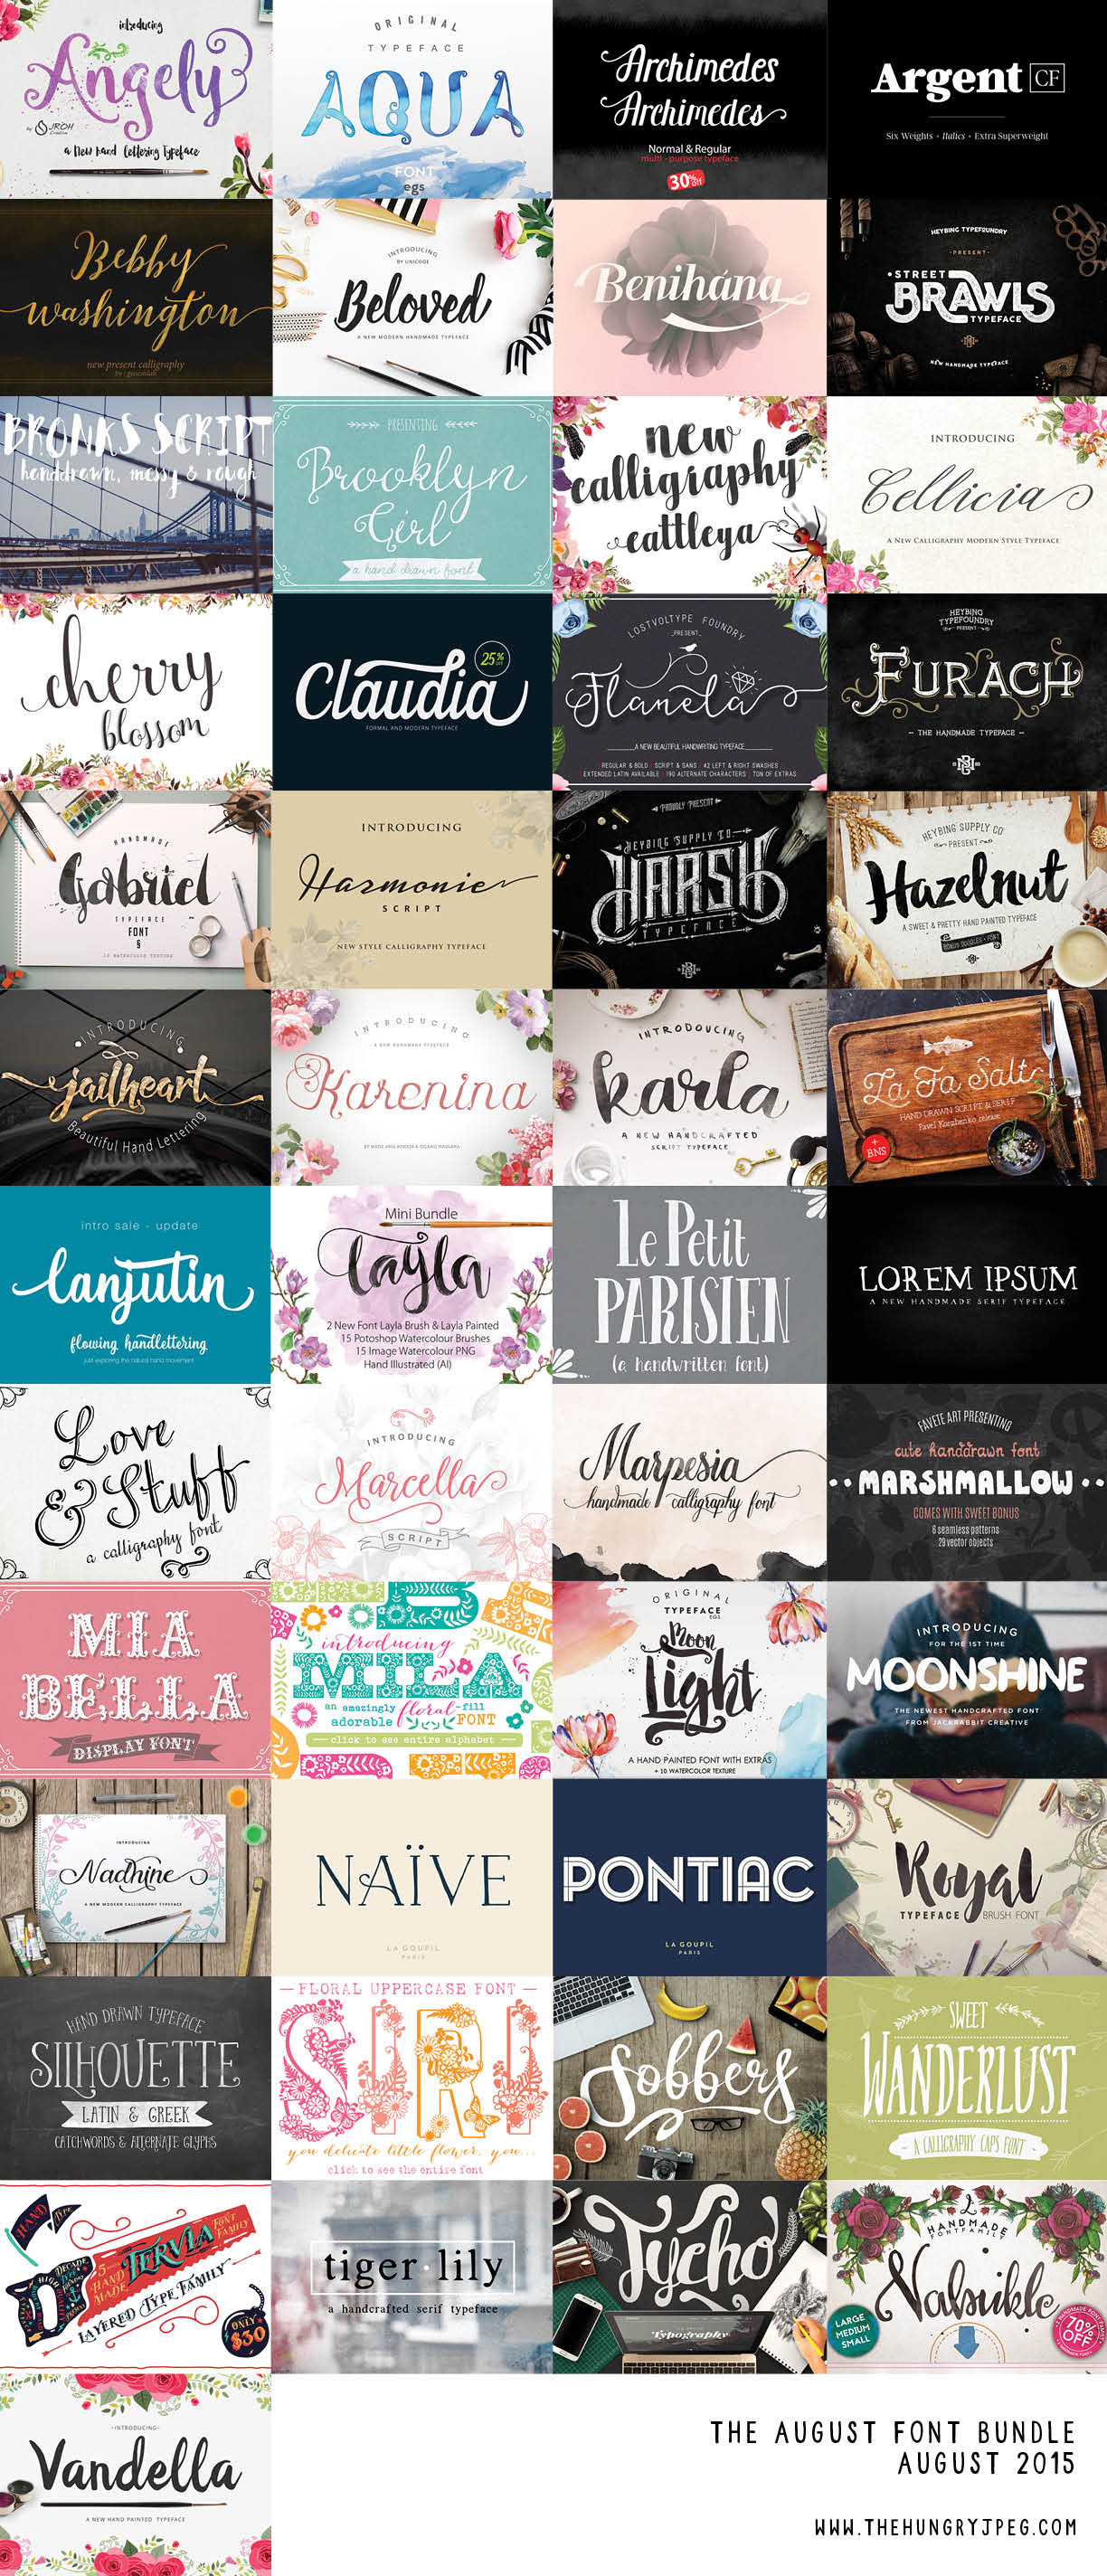 Awesome August Font Bundle From The Hungry JPEG - Photoshopgirl.com